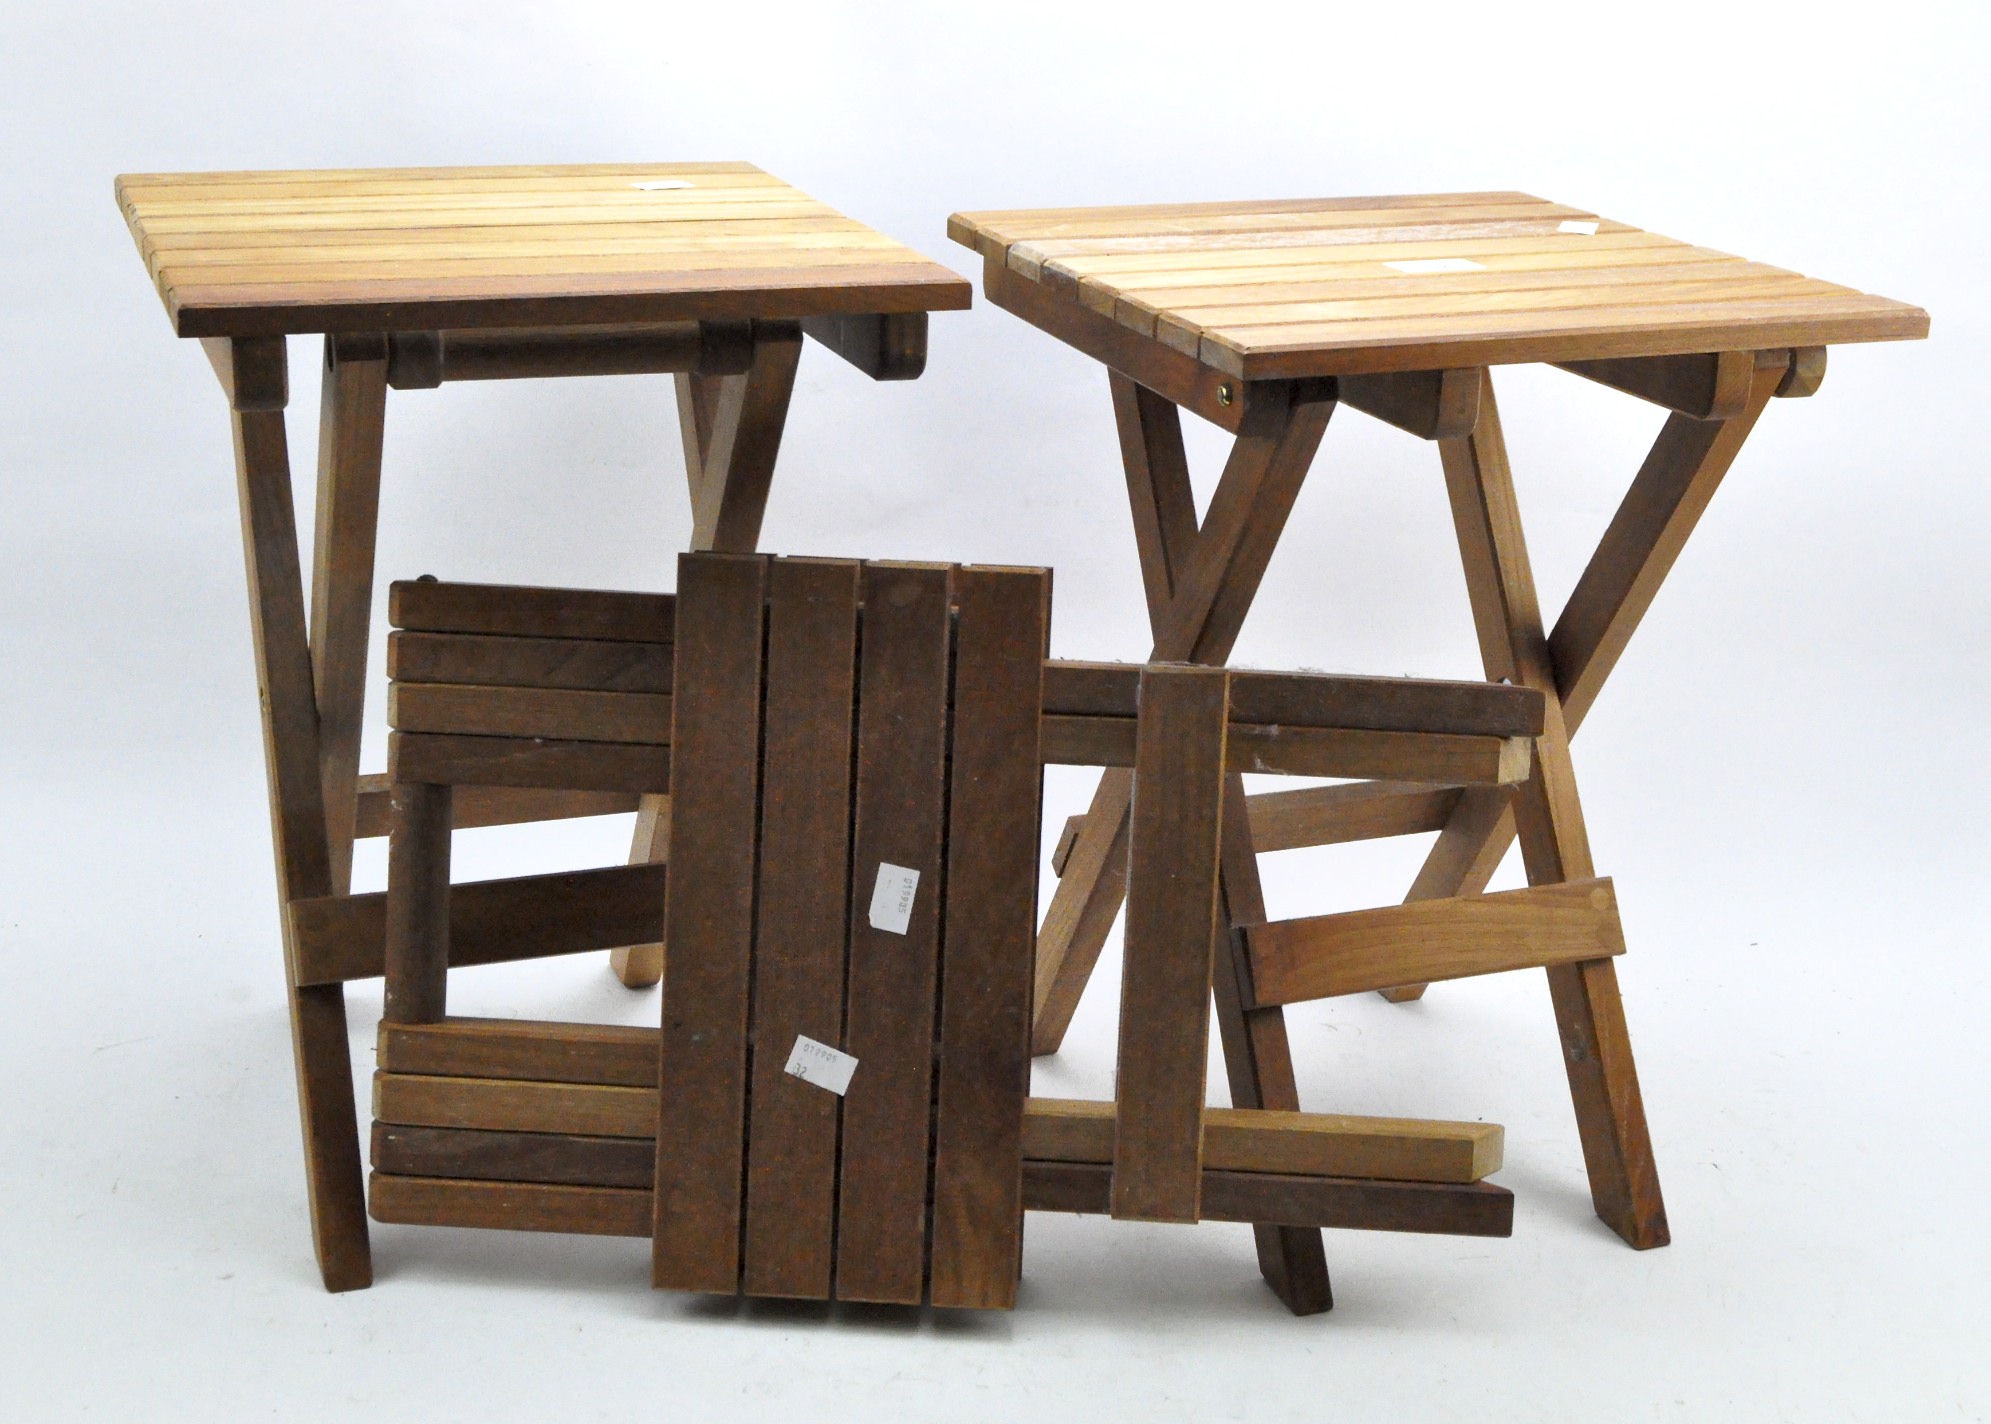 Three small folding wooden picnic tables, - Image 2 of 2